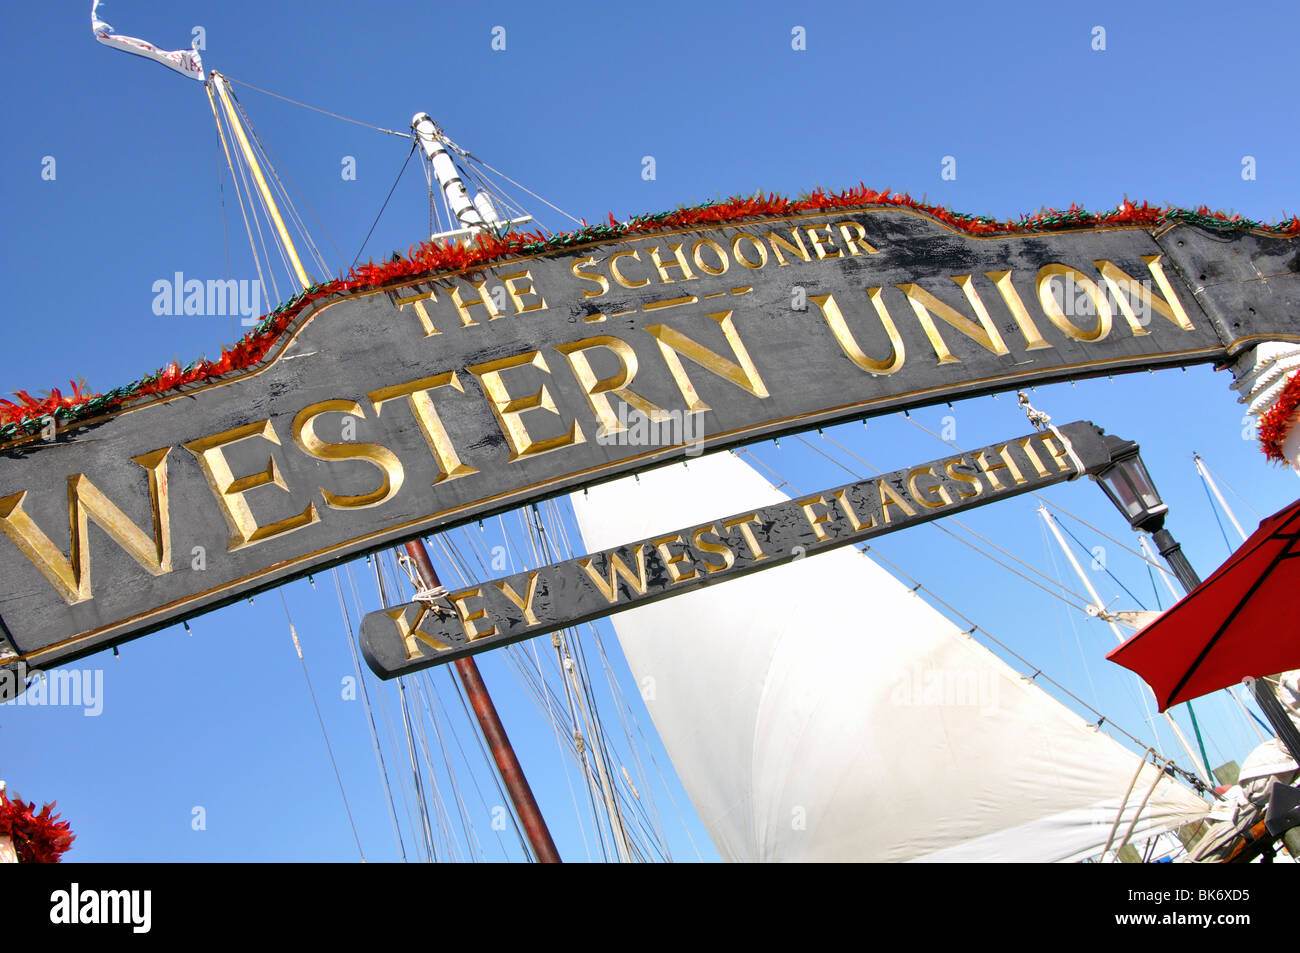 The Key West Flagship The Western Union Schooner Tied Up At The